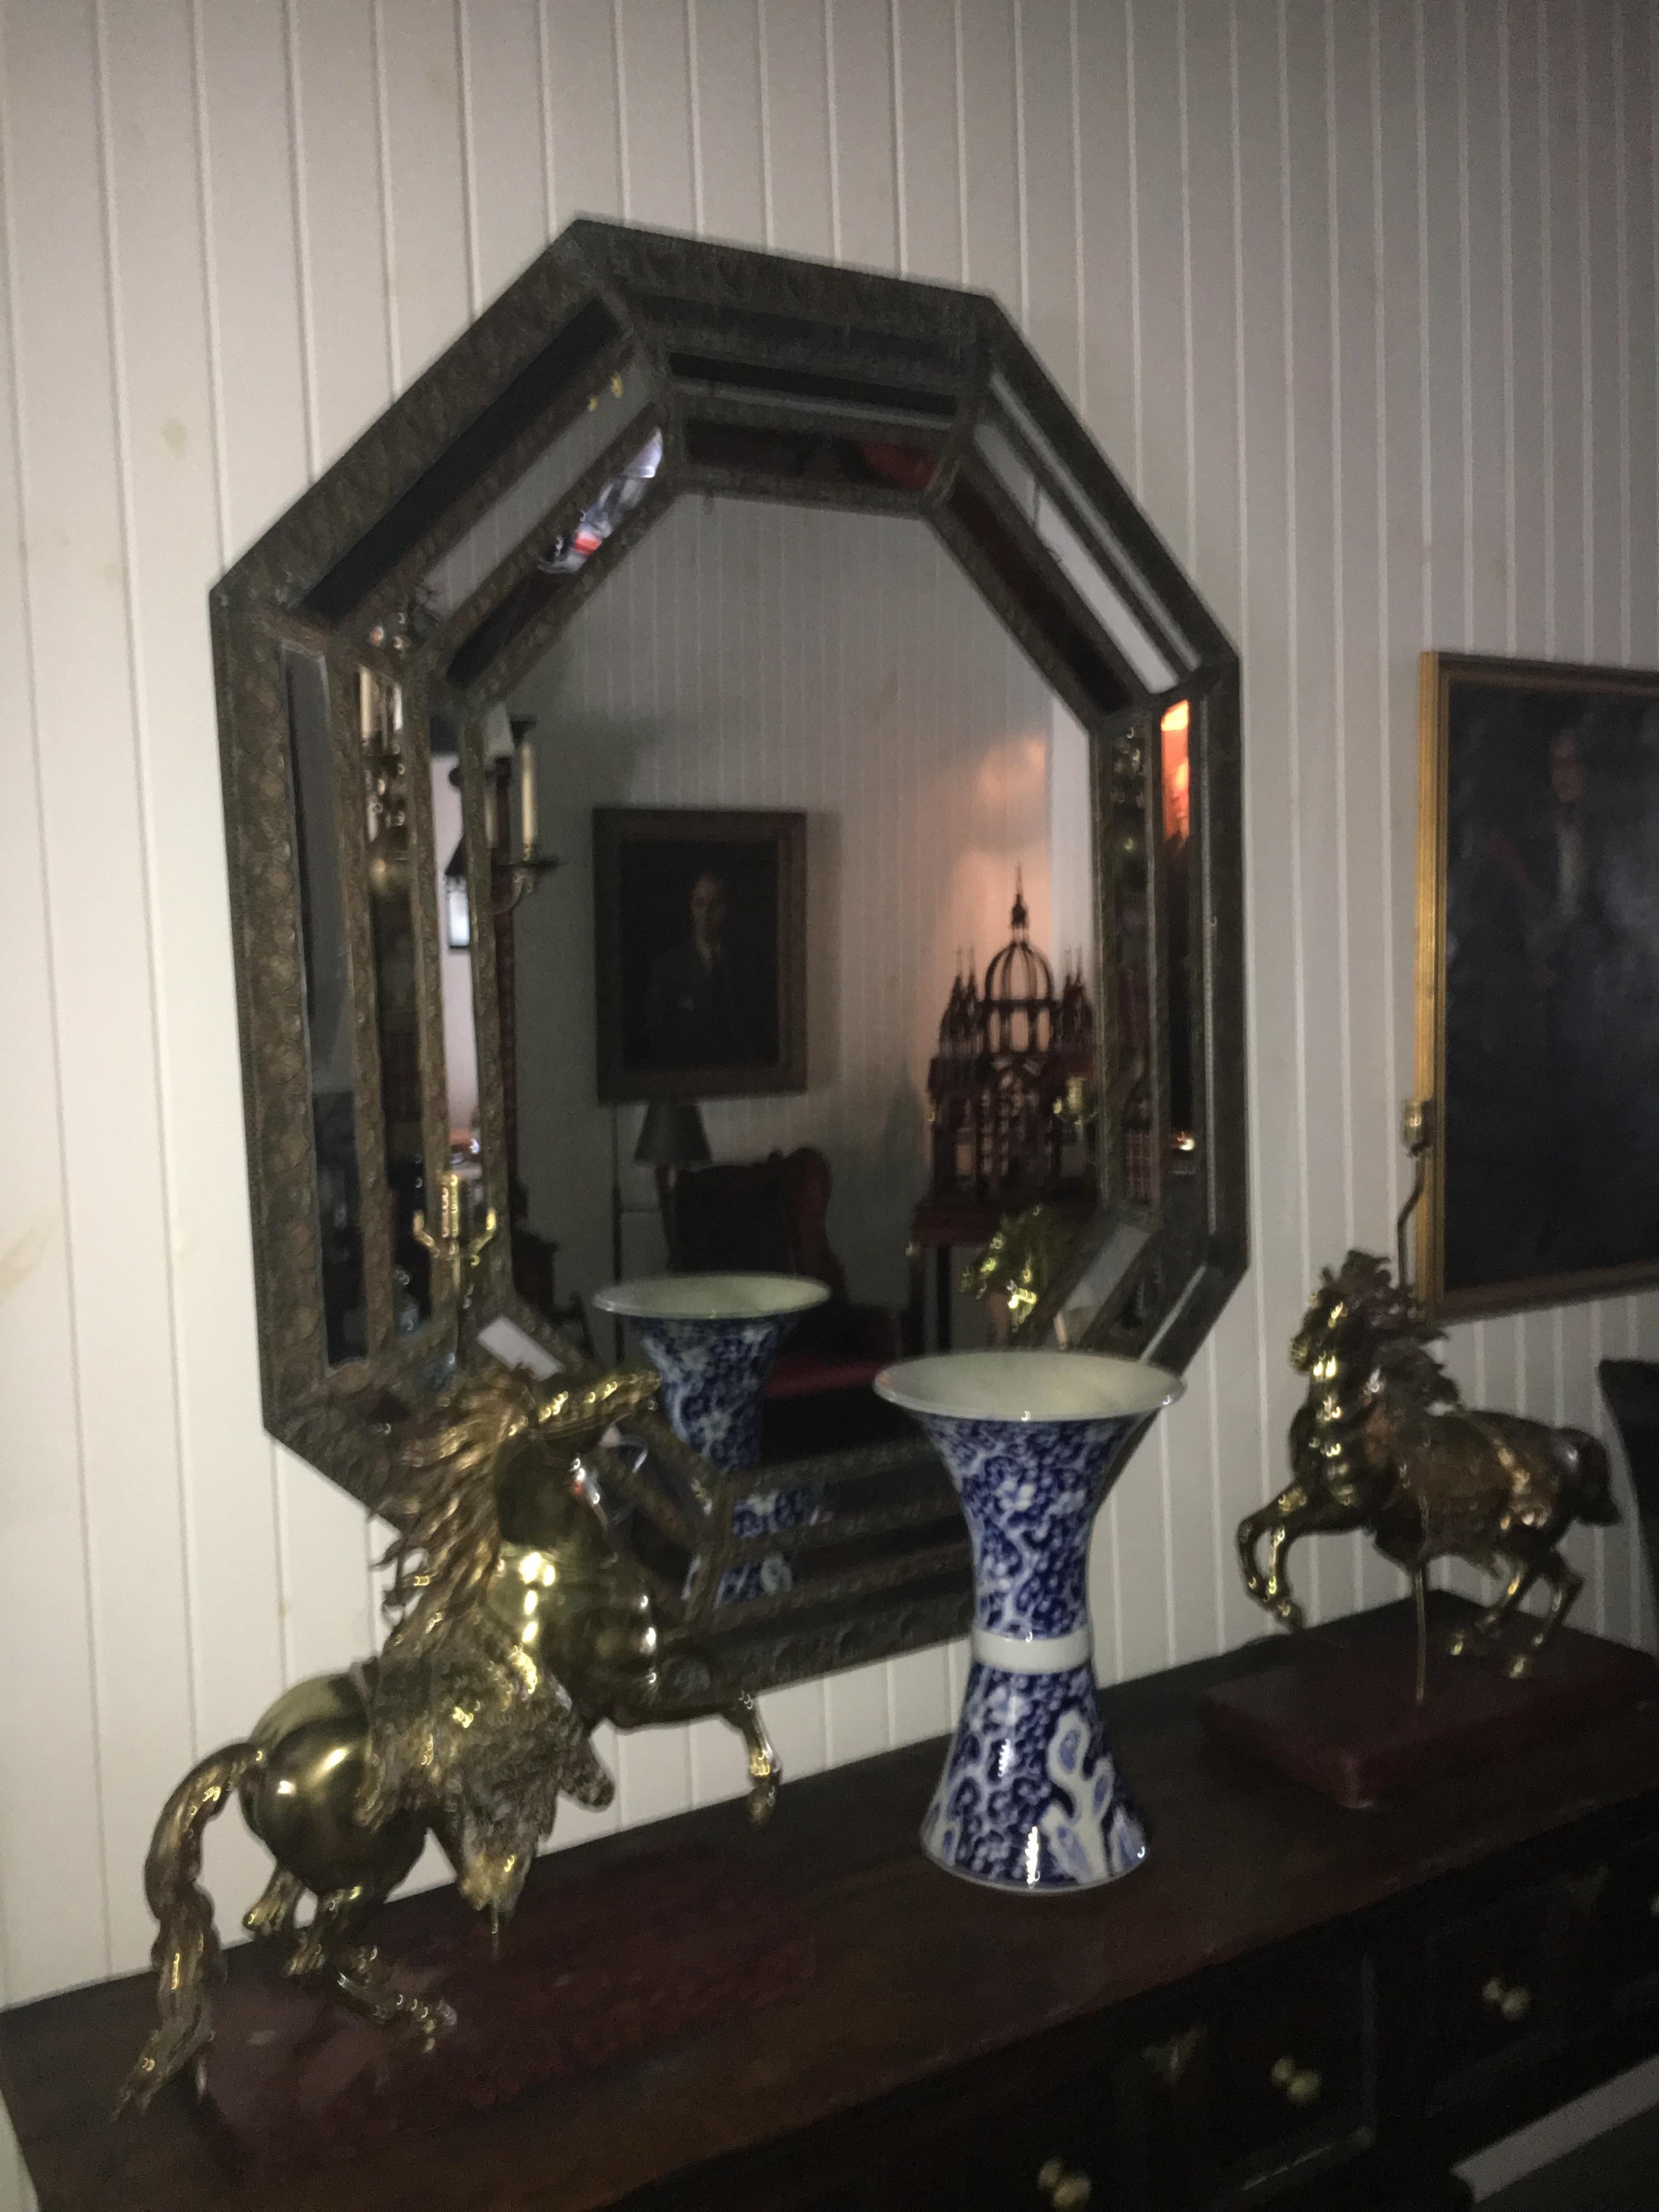 A 19th Century Octagonal Mirror With Repousse Metal Frame, Original Mirror Plate
60.5